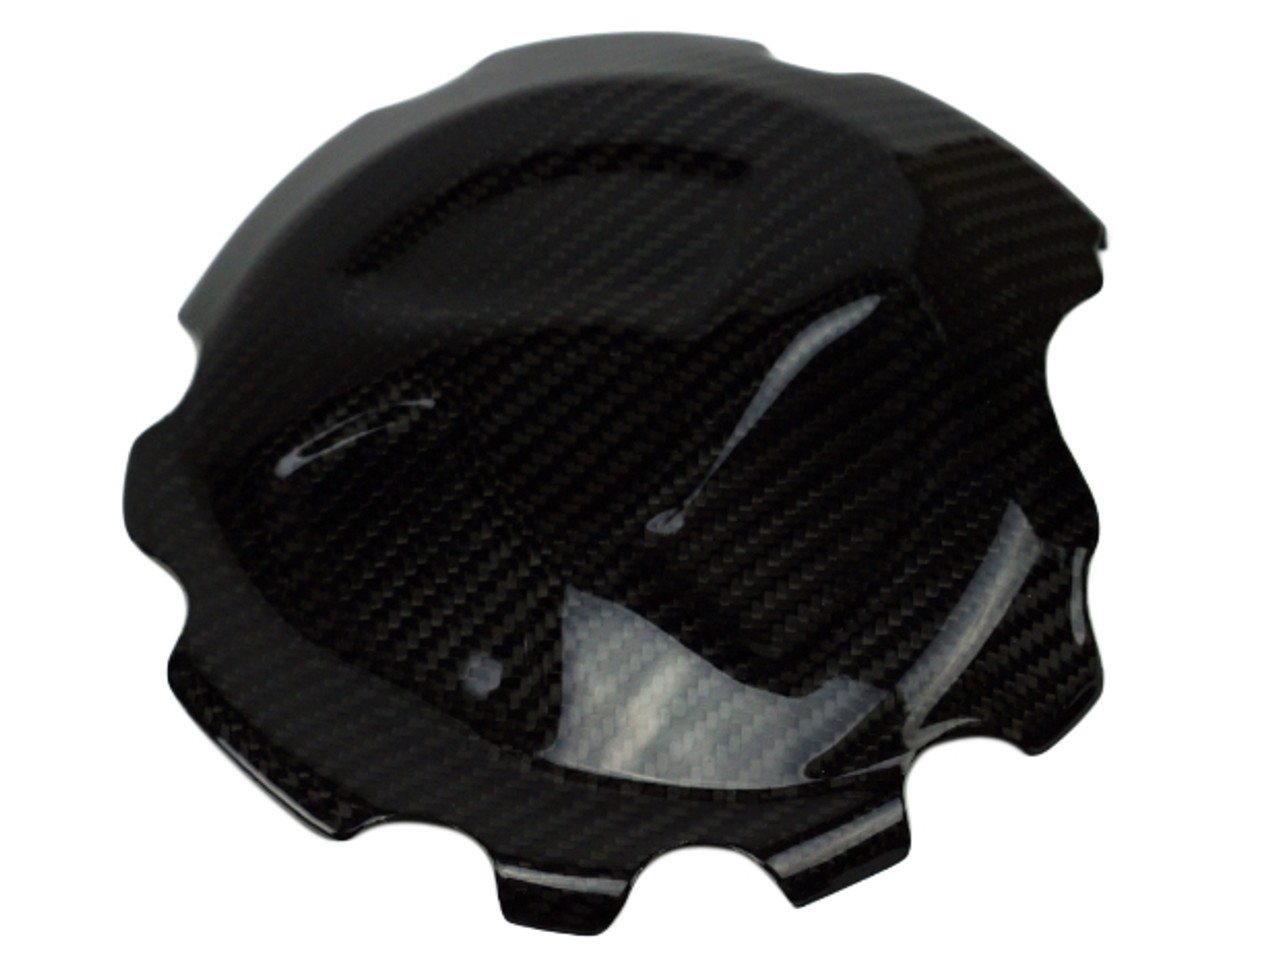 Clutch Cover in Glossy Twill Weave Carbon Fiber for BMW S1000RR, S1000R, S1000XR